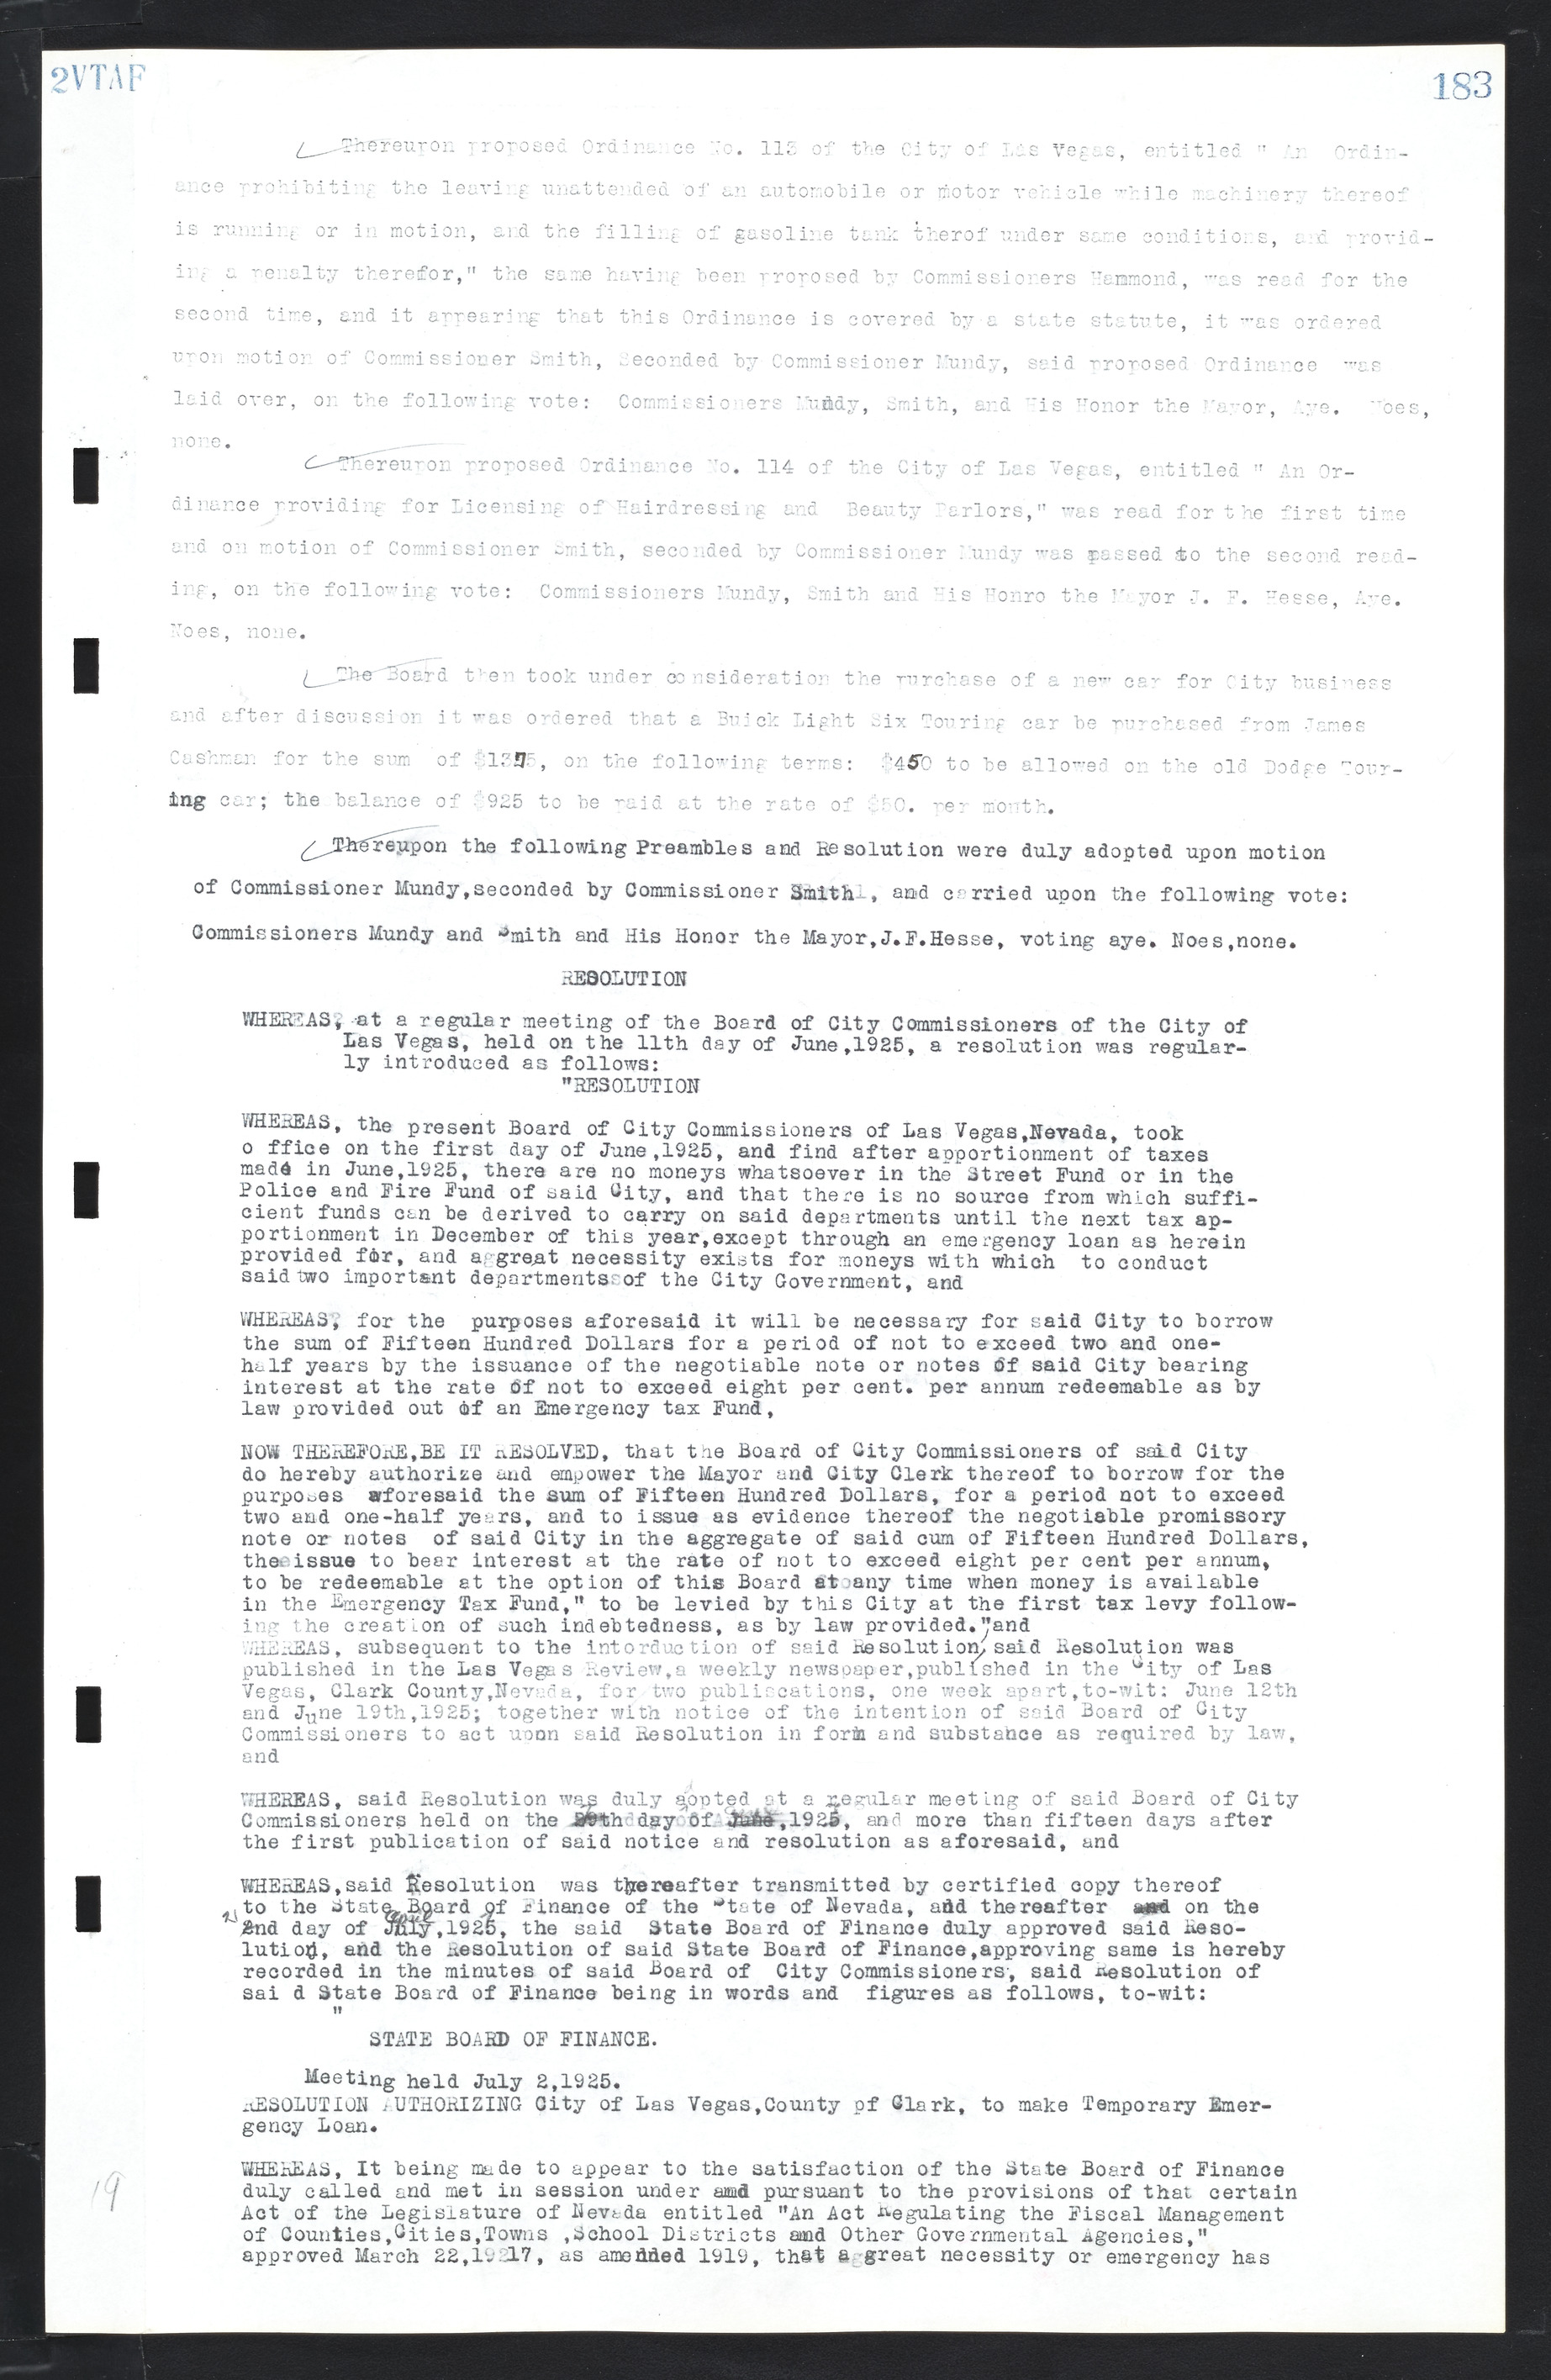 Las Vegas City Commission Minutes, March 1, 1922 to May 10, 1929, lvc000002-190